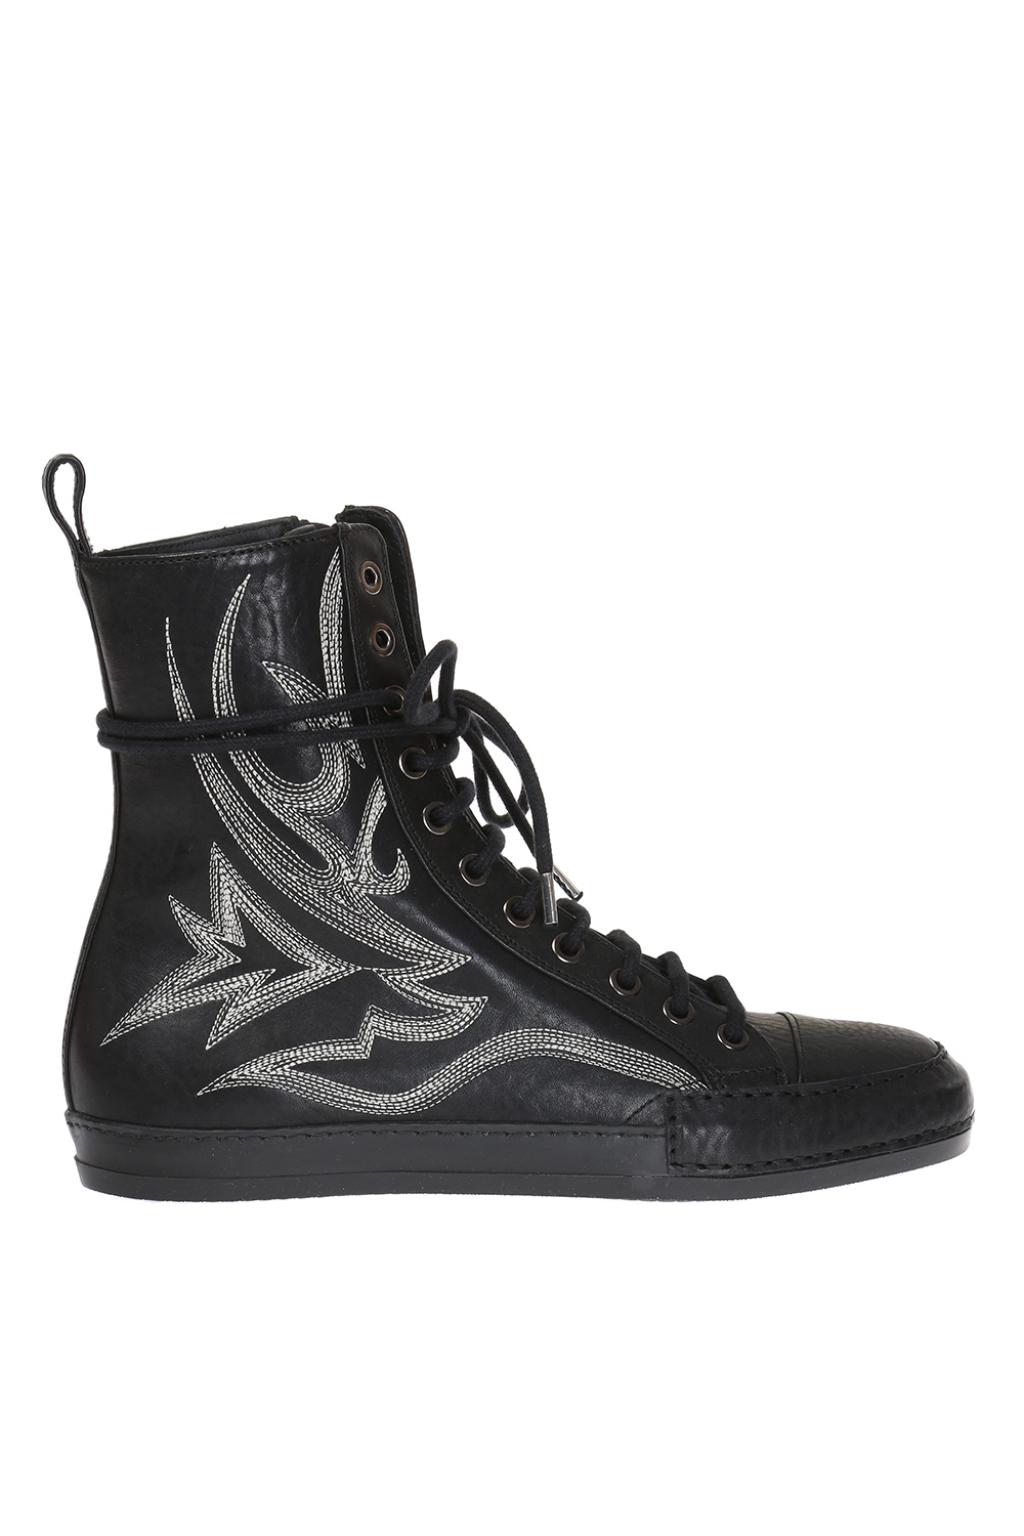 Haider Ackermann Sneakers with embroidery | Men's Shoes | Vitkac